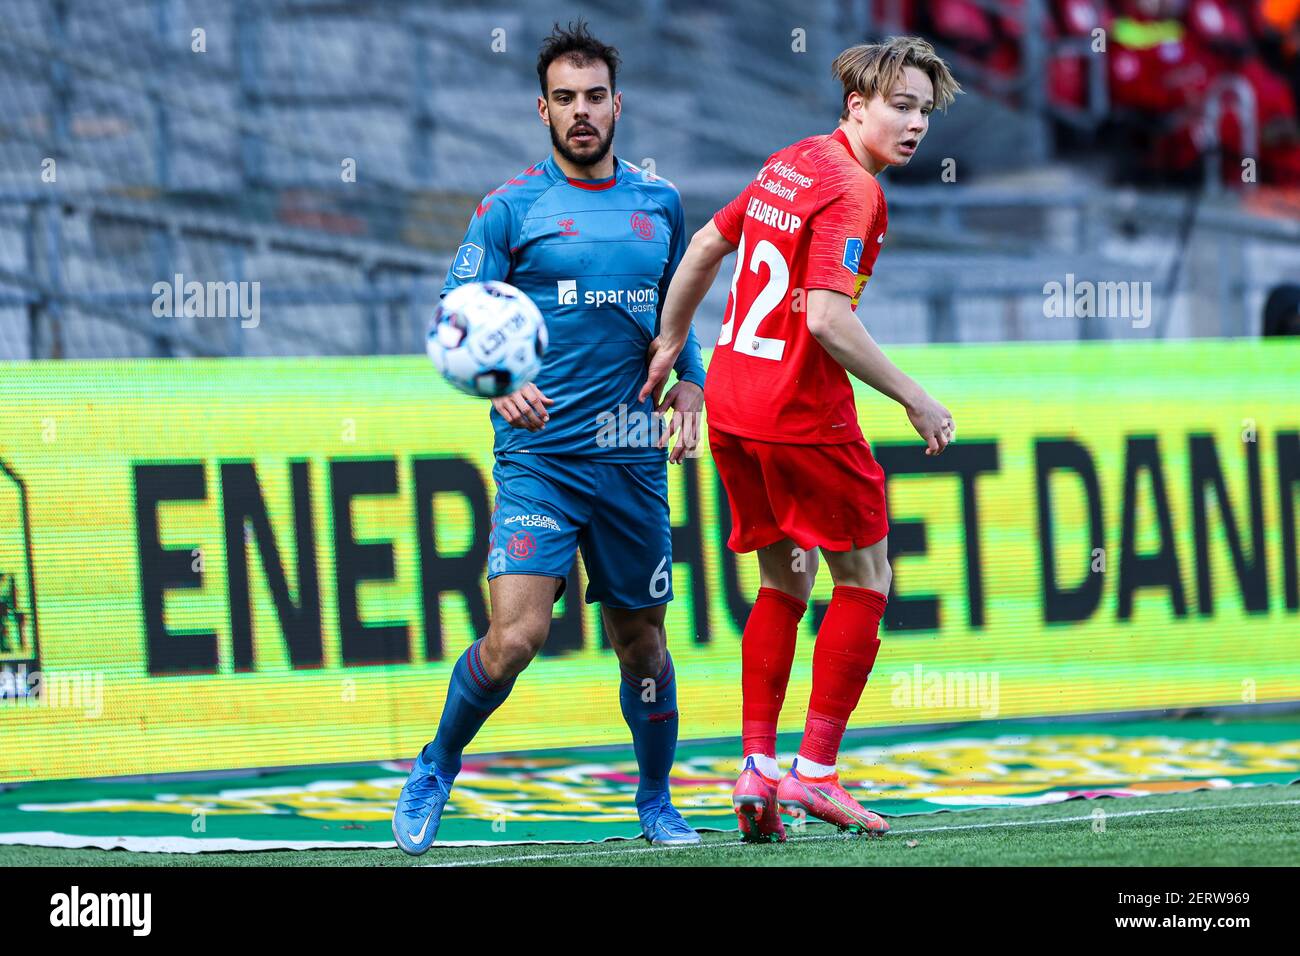 Fortære Serrated Arrowhead Farum, Denmark. 28th Feb, 2021. Pedro Ferreira (6) of AaB Fodbold and  Andreas Schjelderup (32) of FC Nordsjaelland seen in the 3F Superliga match  between FC Nordsjaelland and AaB Fodbold in Right